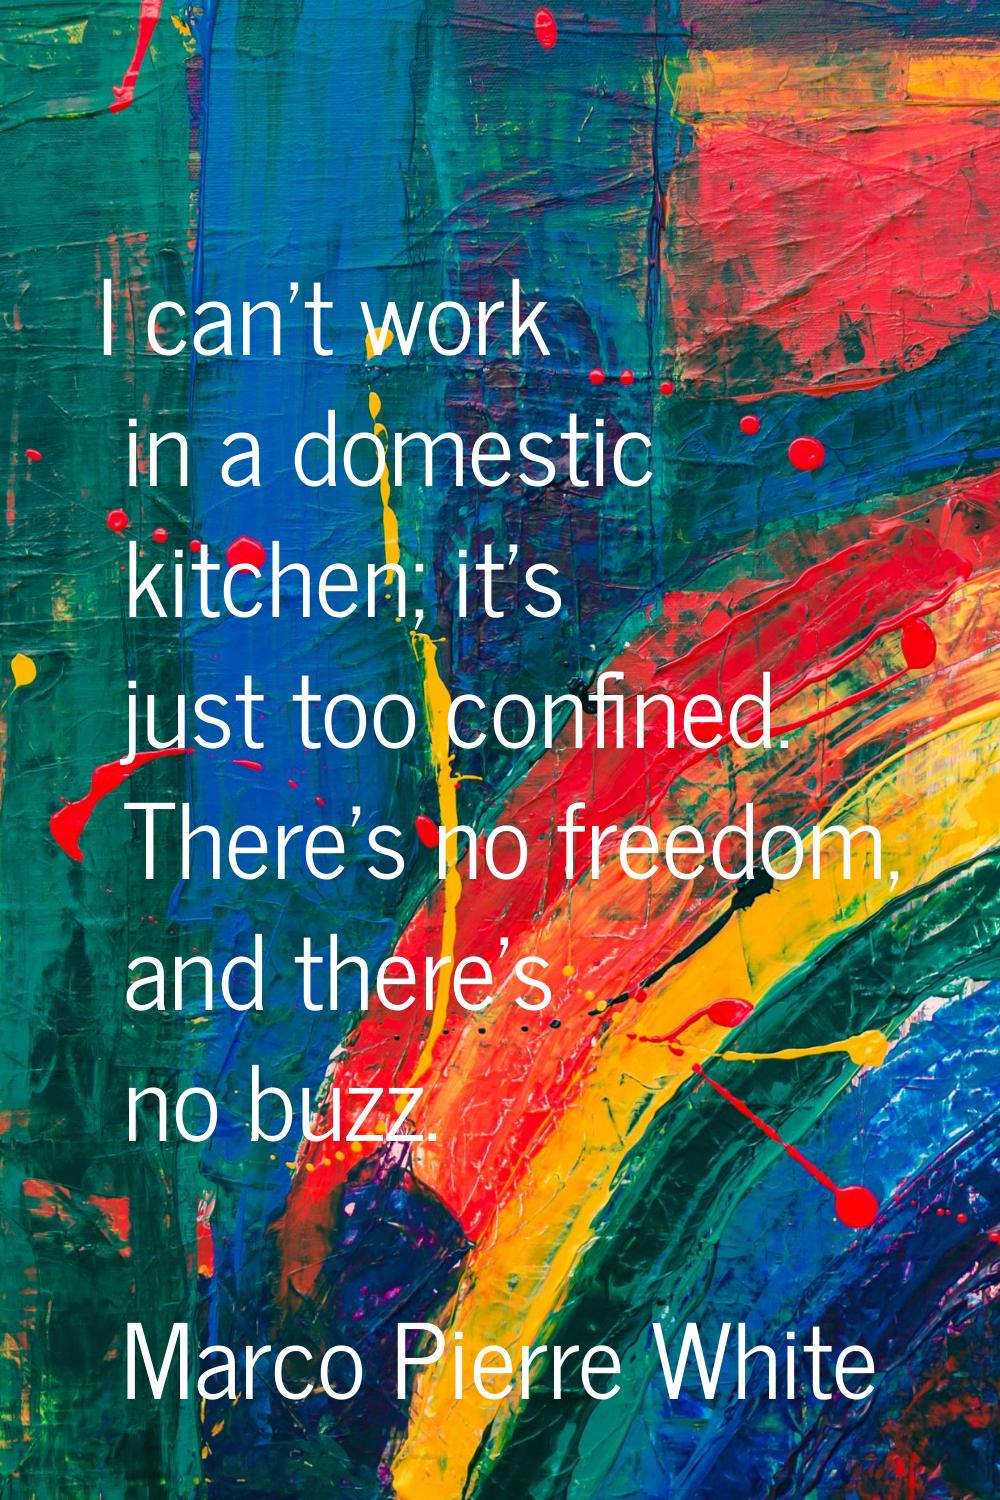 I can't work in a domestic kitchen; it's just too confined. There's no freedom, and there's no buzz